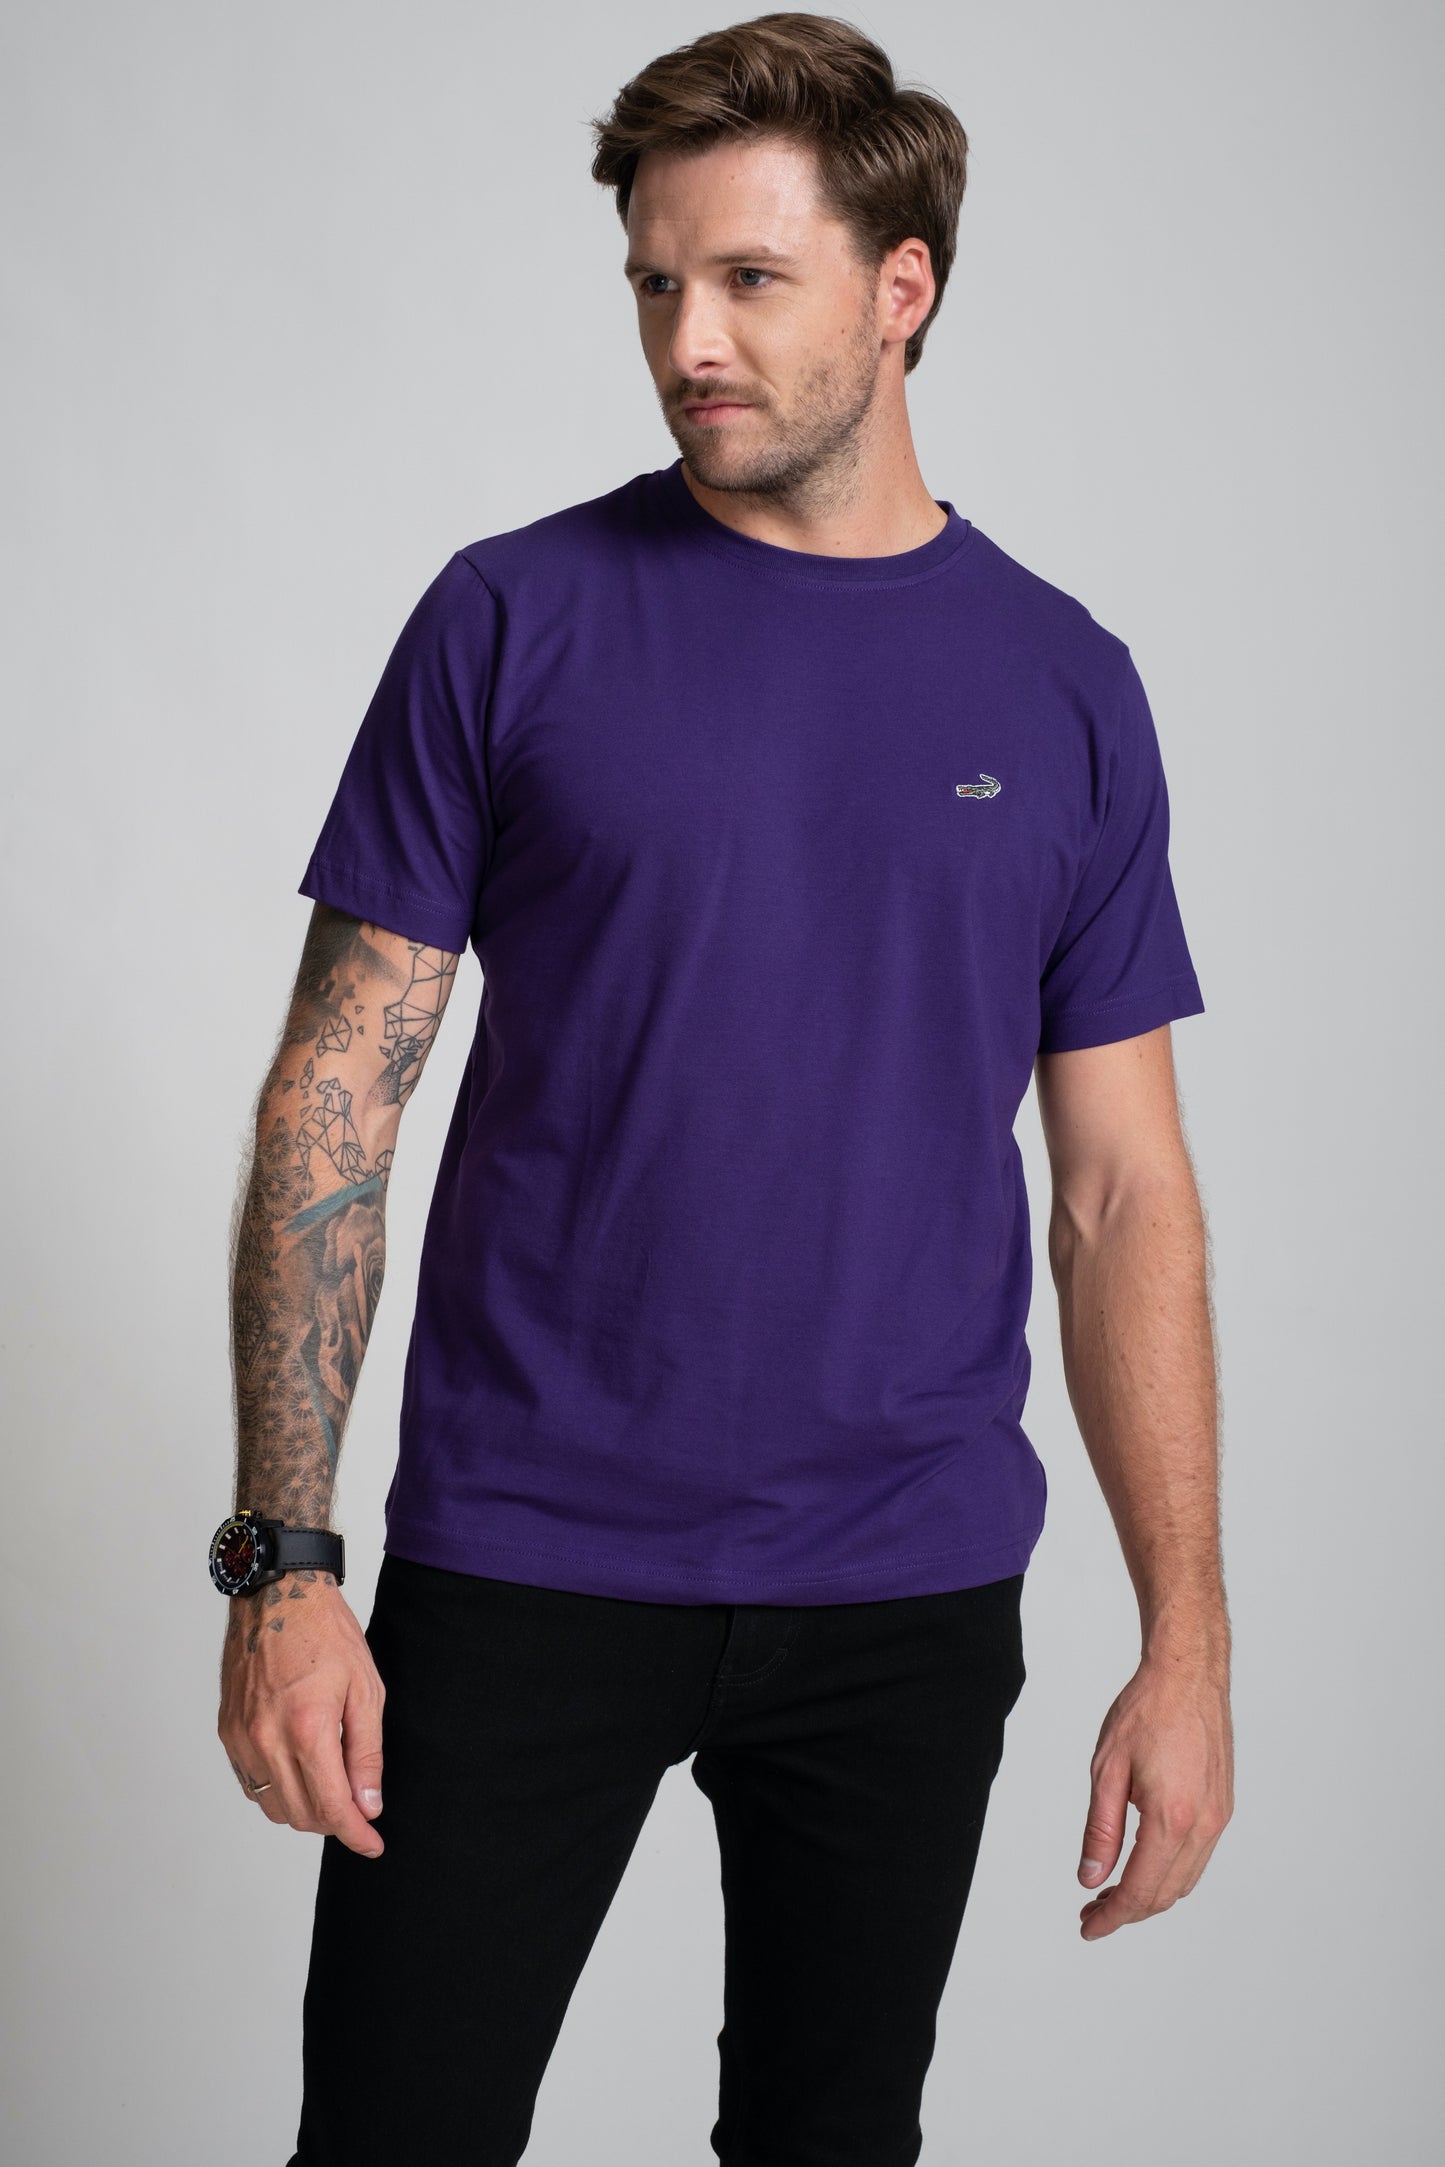 Classic Fit Short sleeves-CasualCrew Neck - Grape Royal